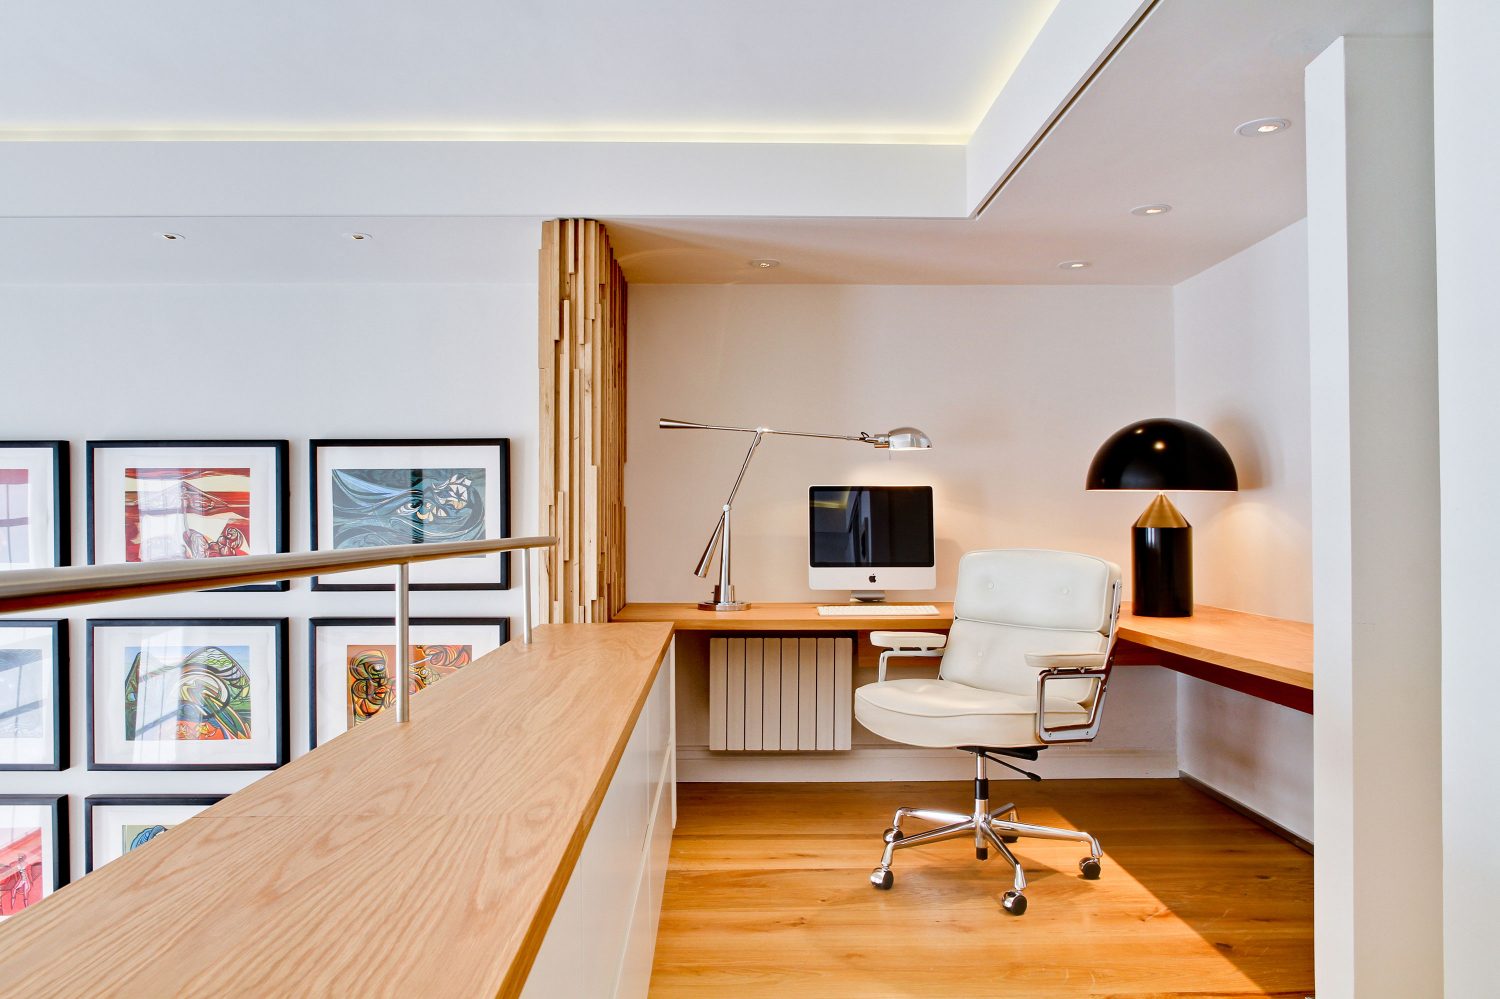 Design For Living by Daniel Hopwood – home office with built in desk. Mayfair interiors